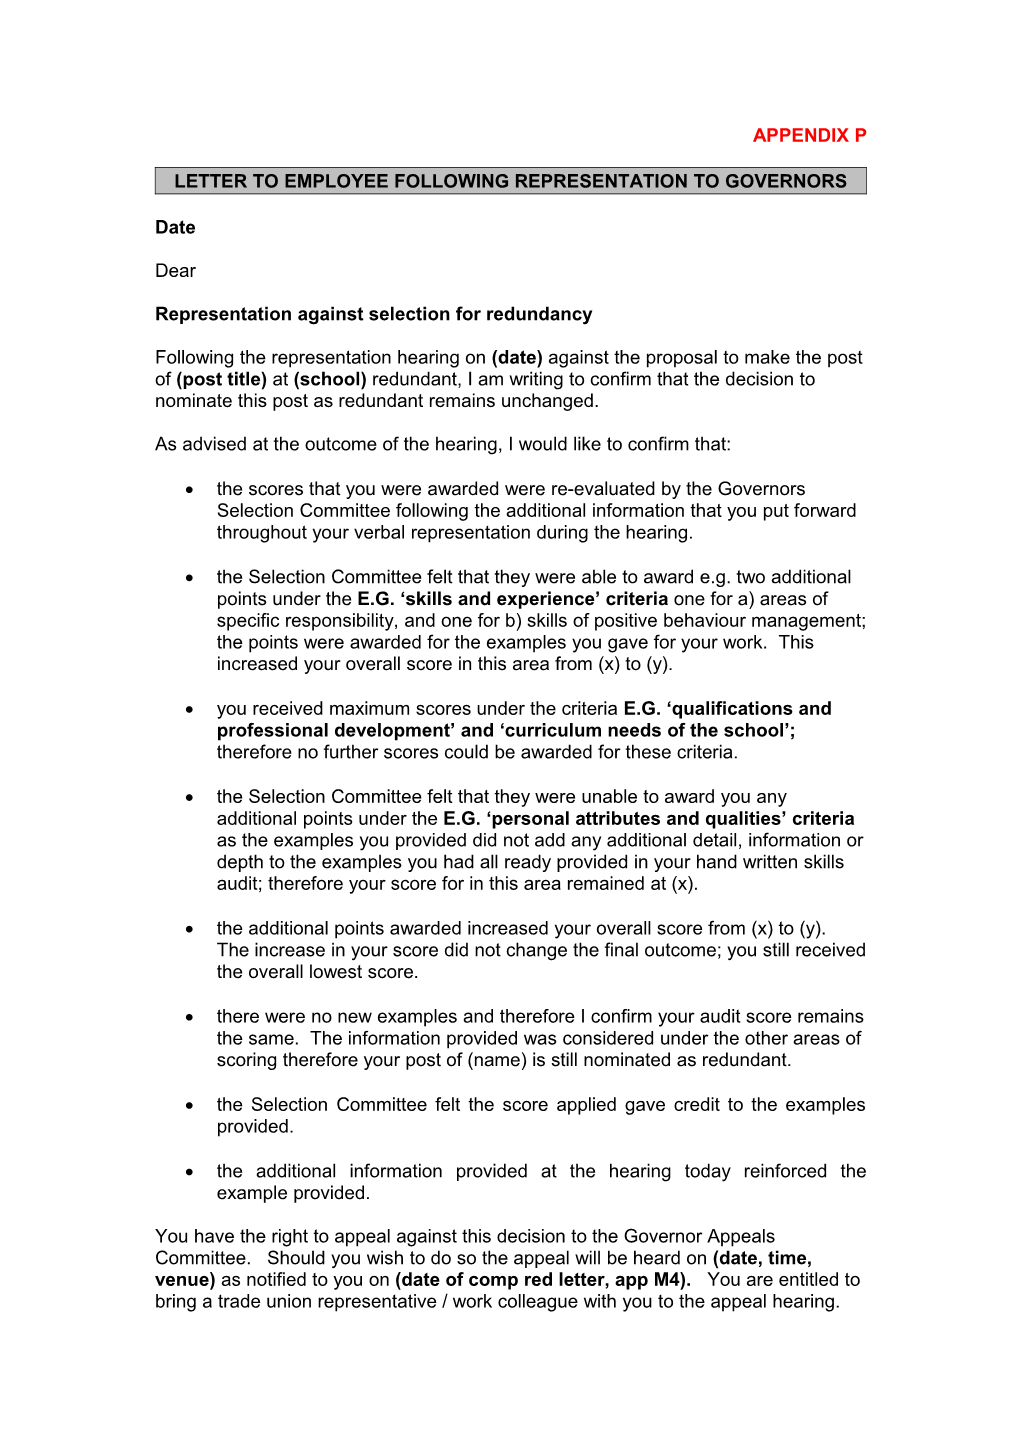 Appendix P - Letter to Employee Following Representation Hearing